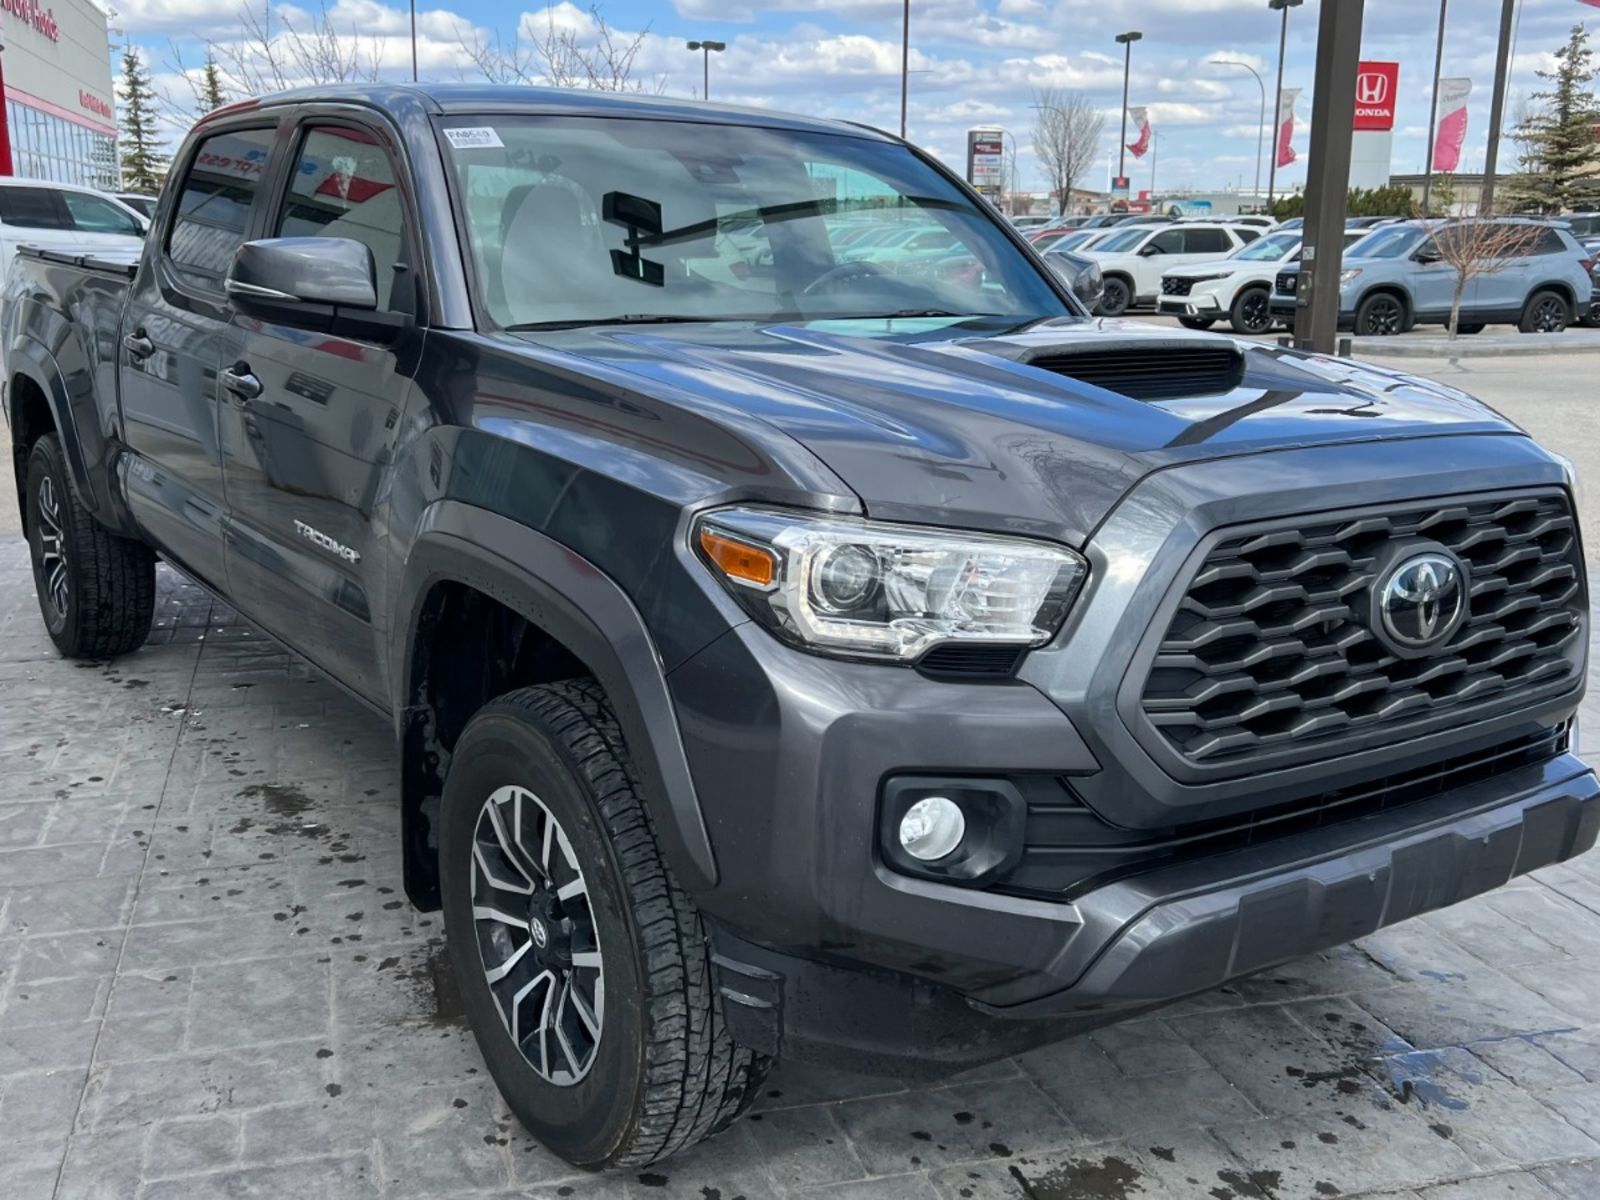 2021 Toyota Tacoma TRD SPORT PREMIUM- NO ACCIDENTS, LOCAL TRUCK, LEAT